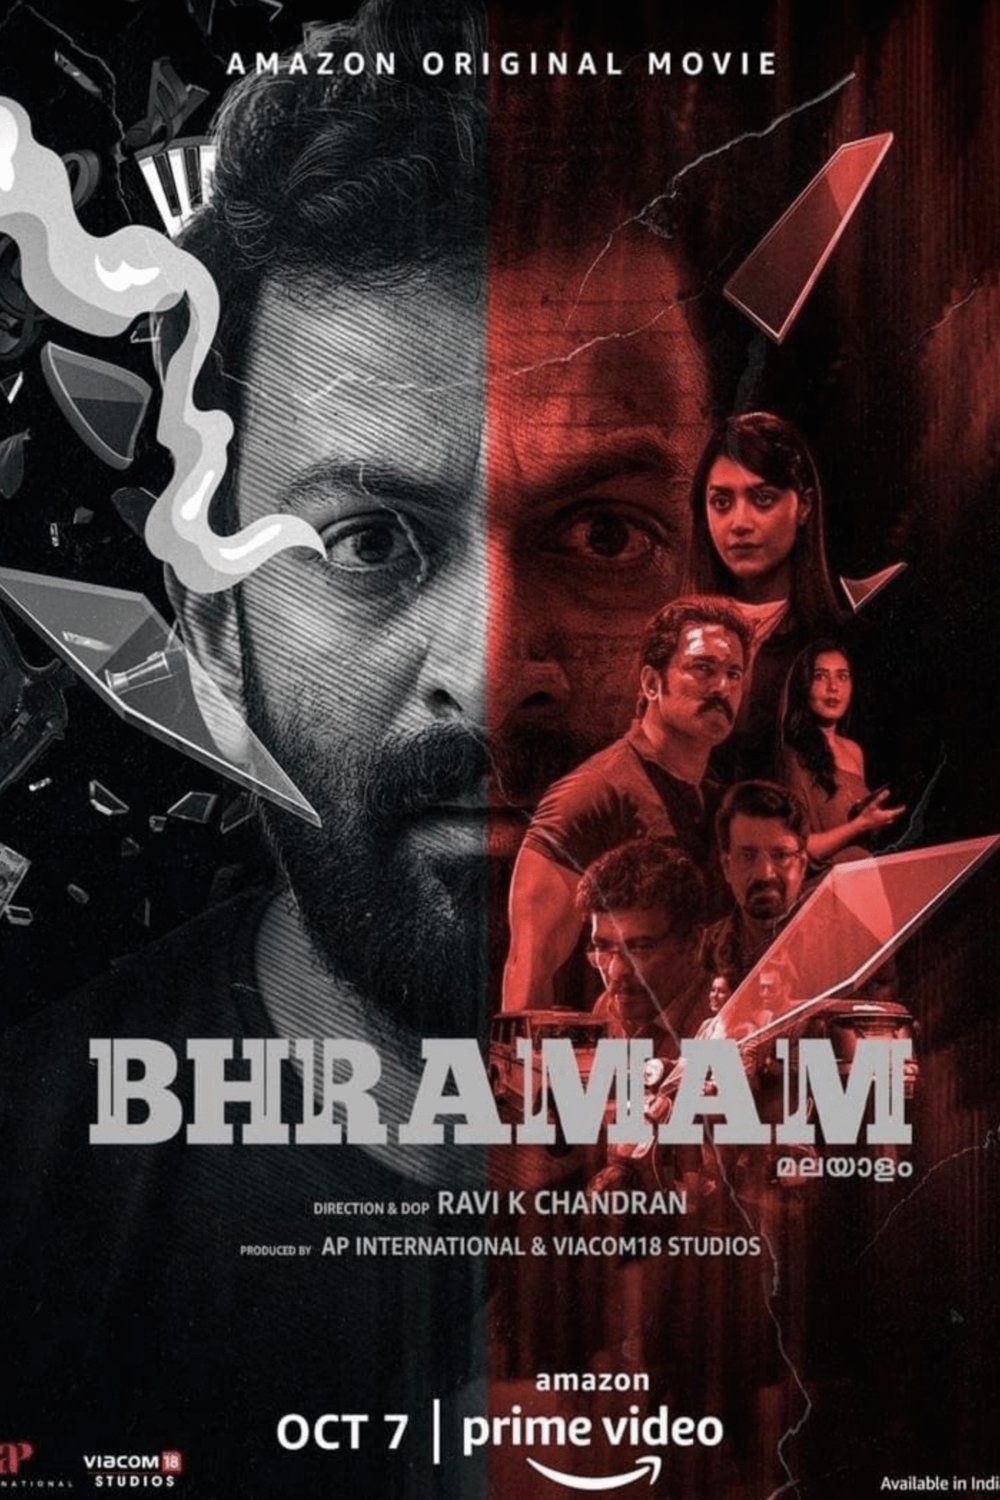 Malayalam poster of the movie Bhramam